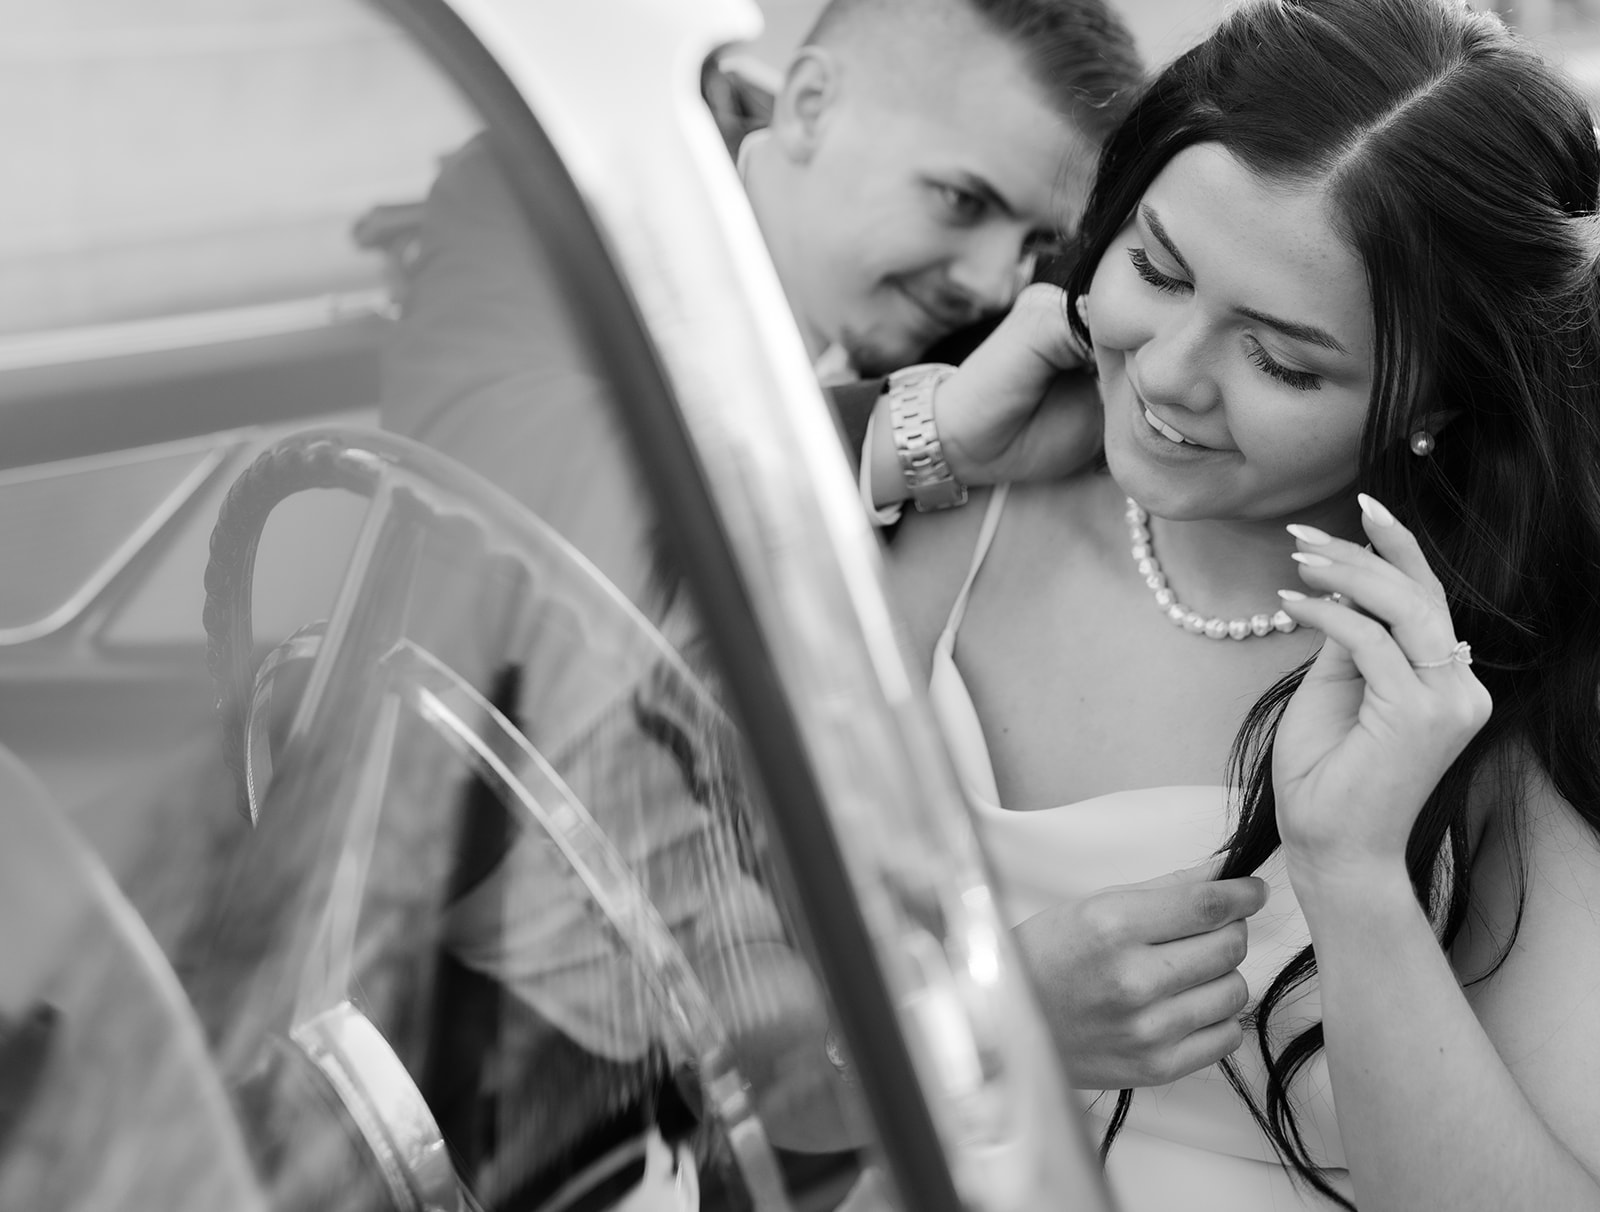 Vintage Classic Car Engagement Session in Downtown Boise, Idaho 